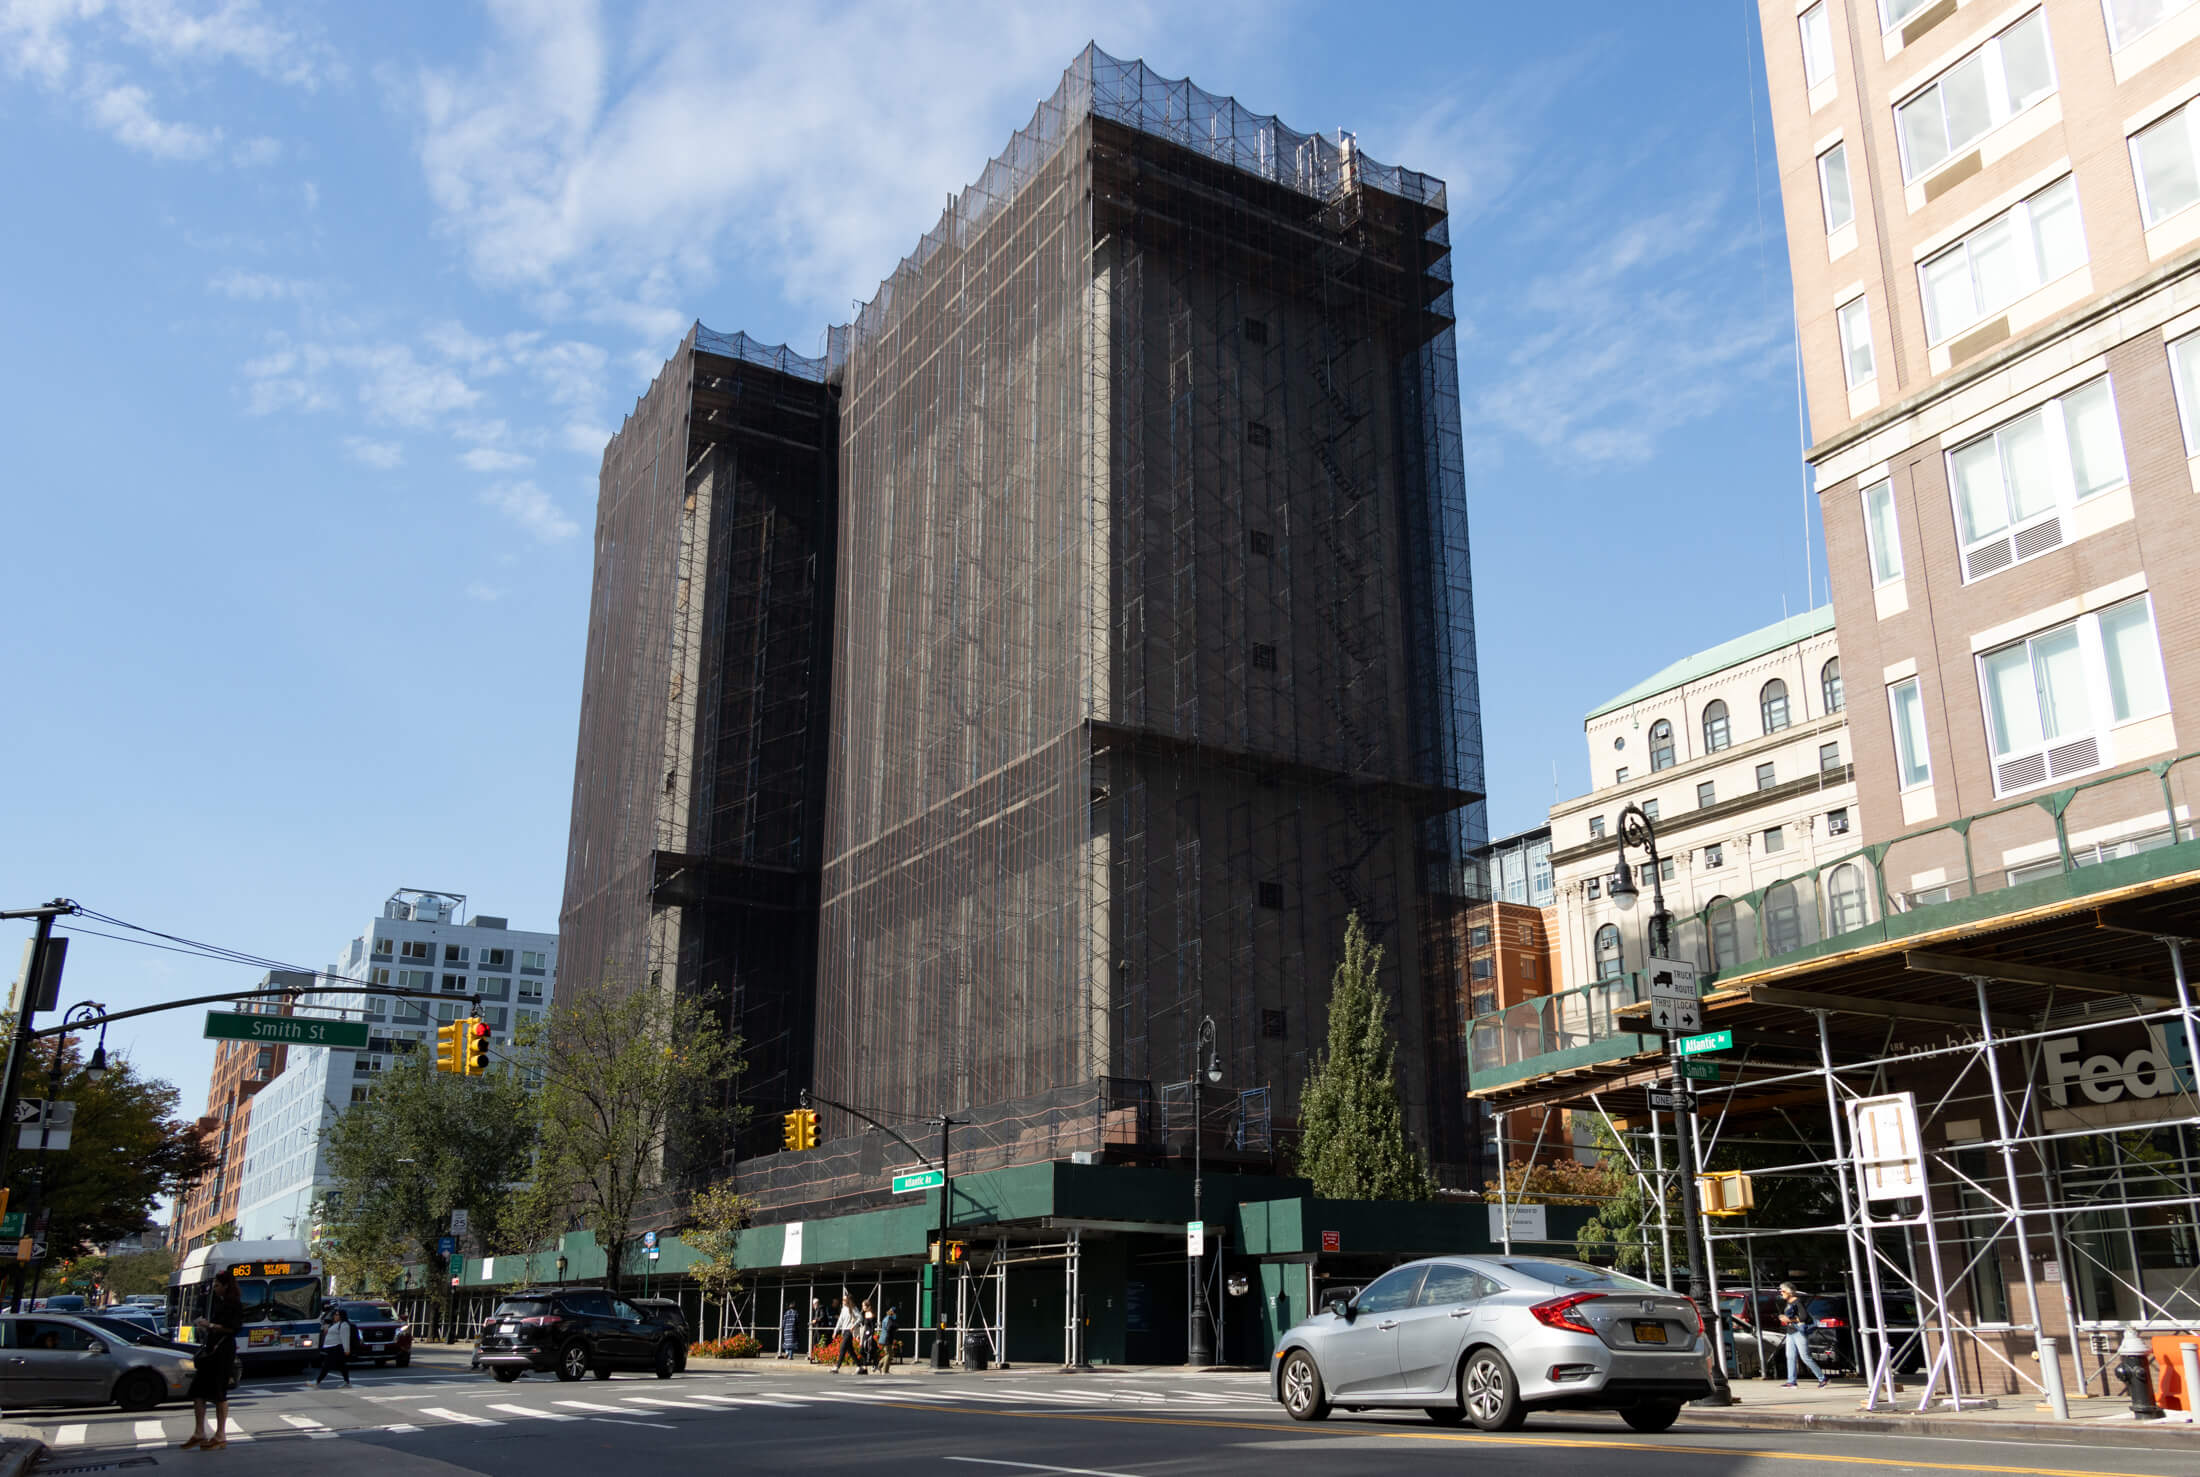 view of the scaffolded jail on atlantic avenue looking toward boerum place